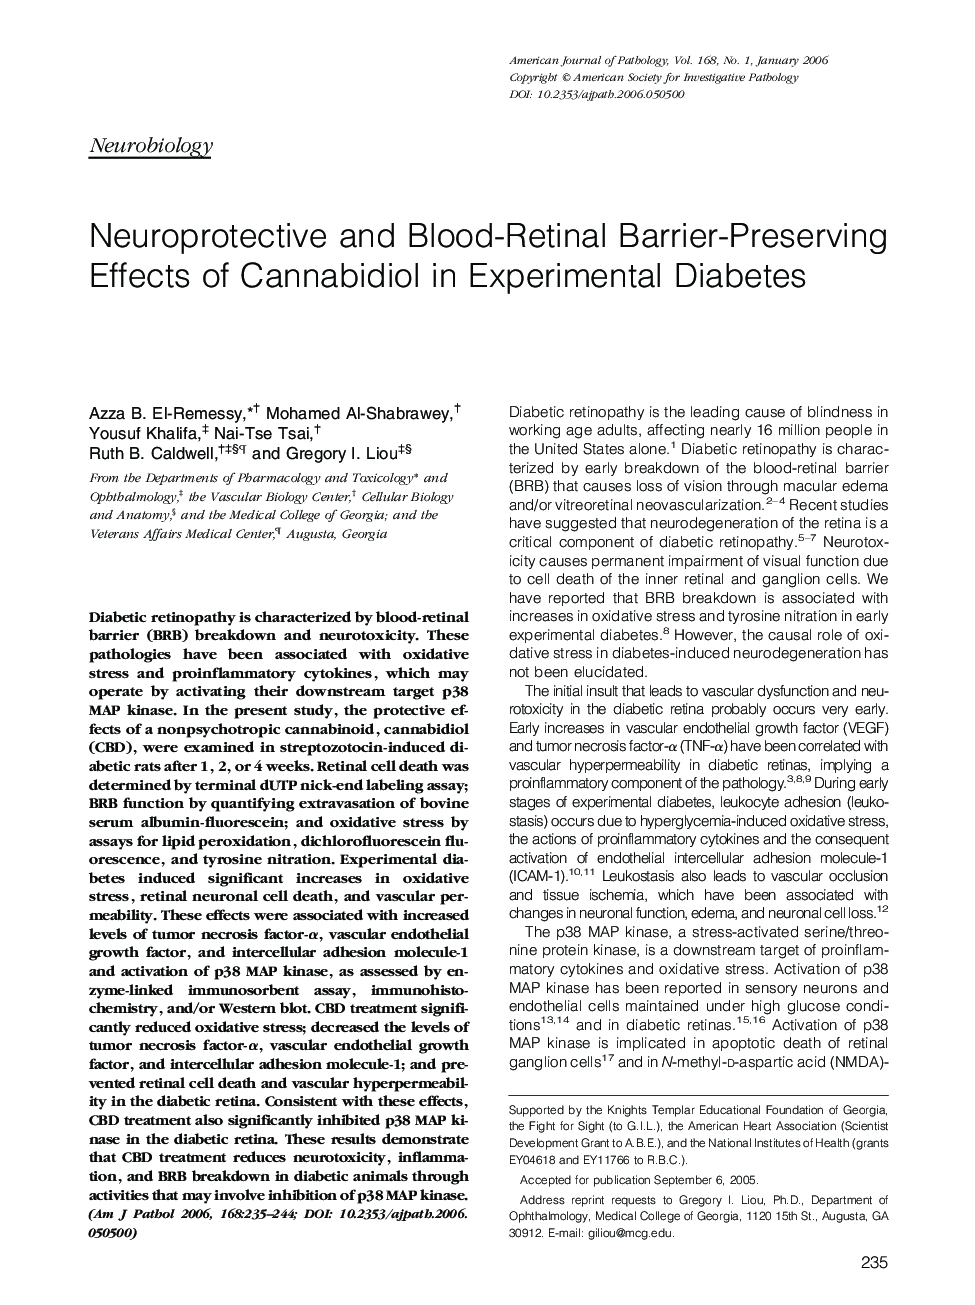 Regular ArticlesNeuroprotective and Blood-Retinal Barrier-Preserving Effects of Cannabidiol in Experimental Diabetes